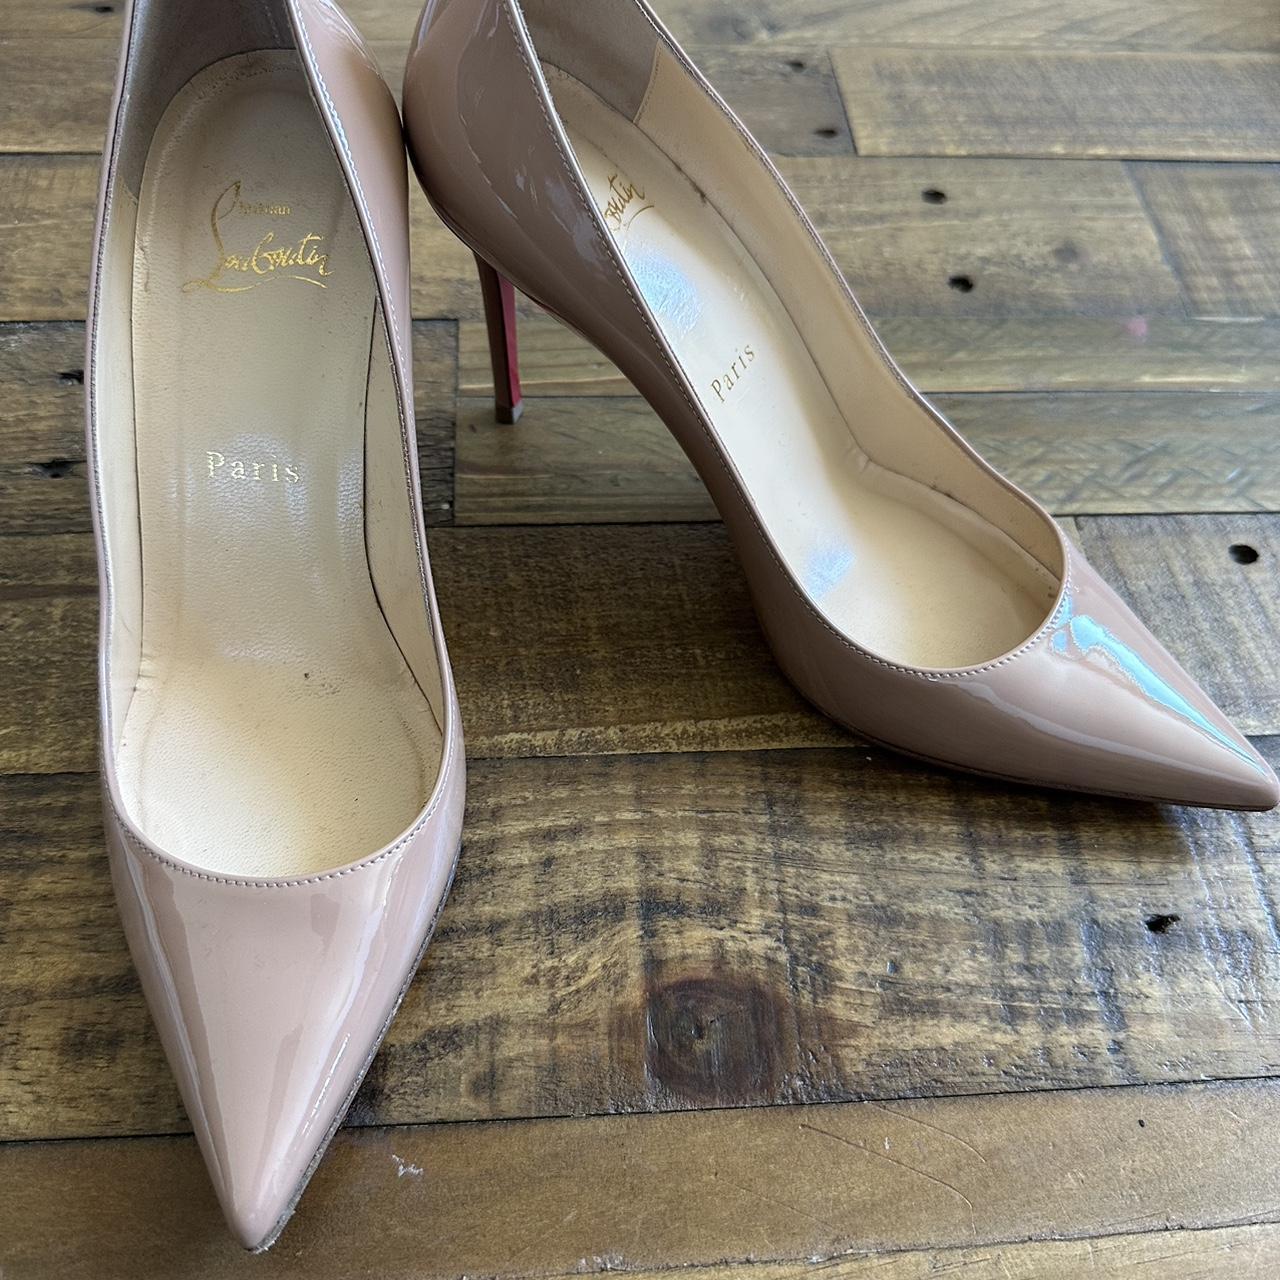 Used Christian Louboutin Paris heels. They come with 2 Louboutin